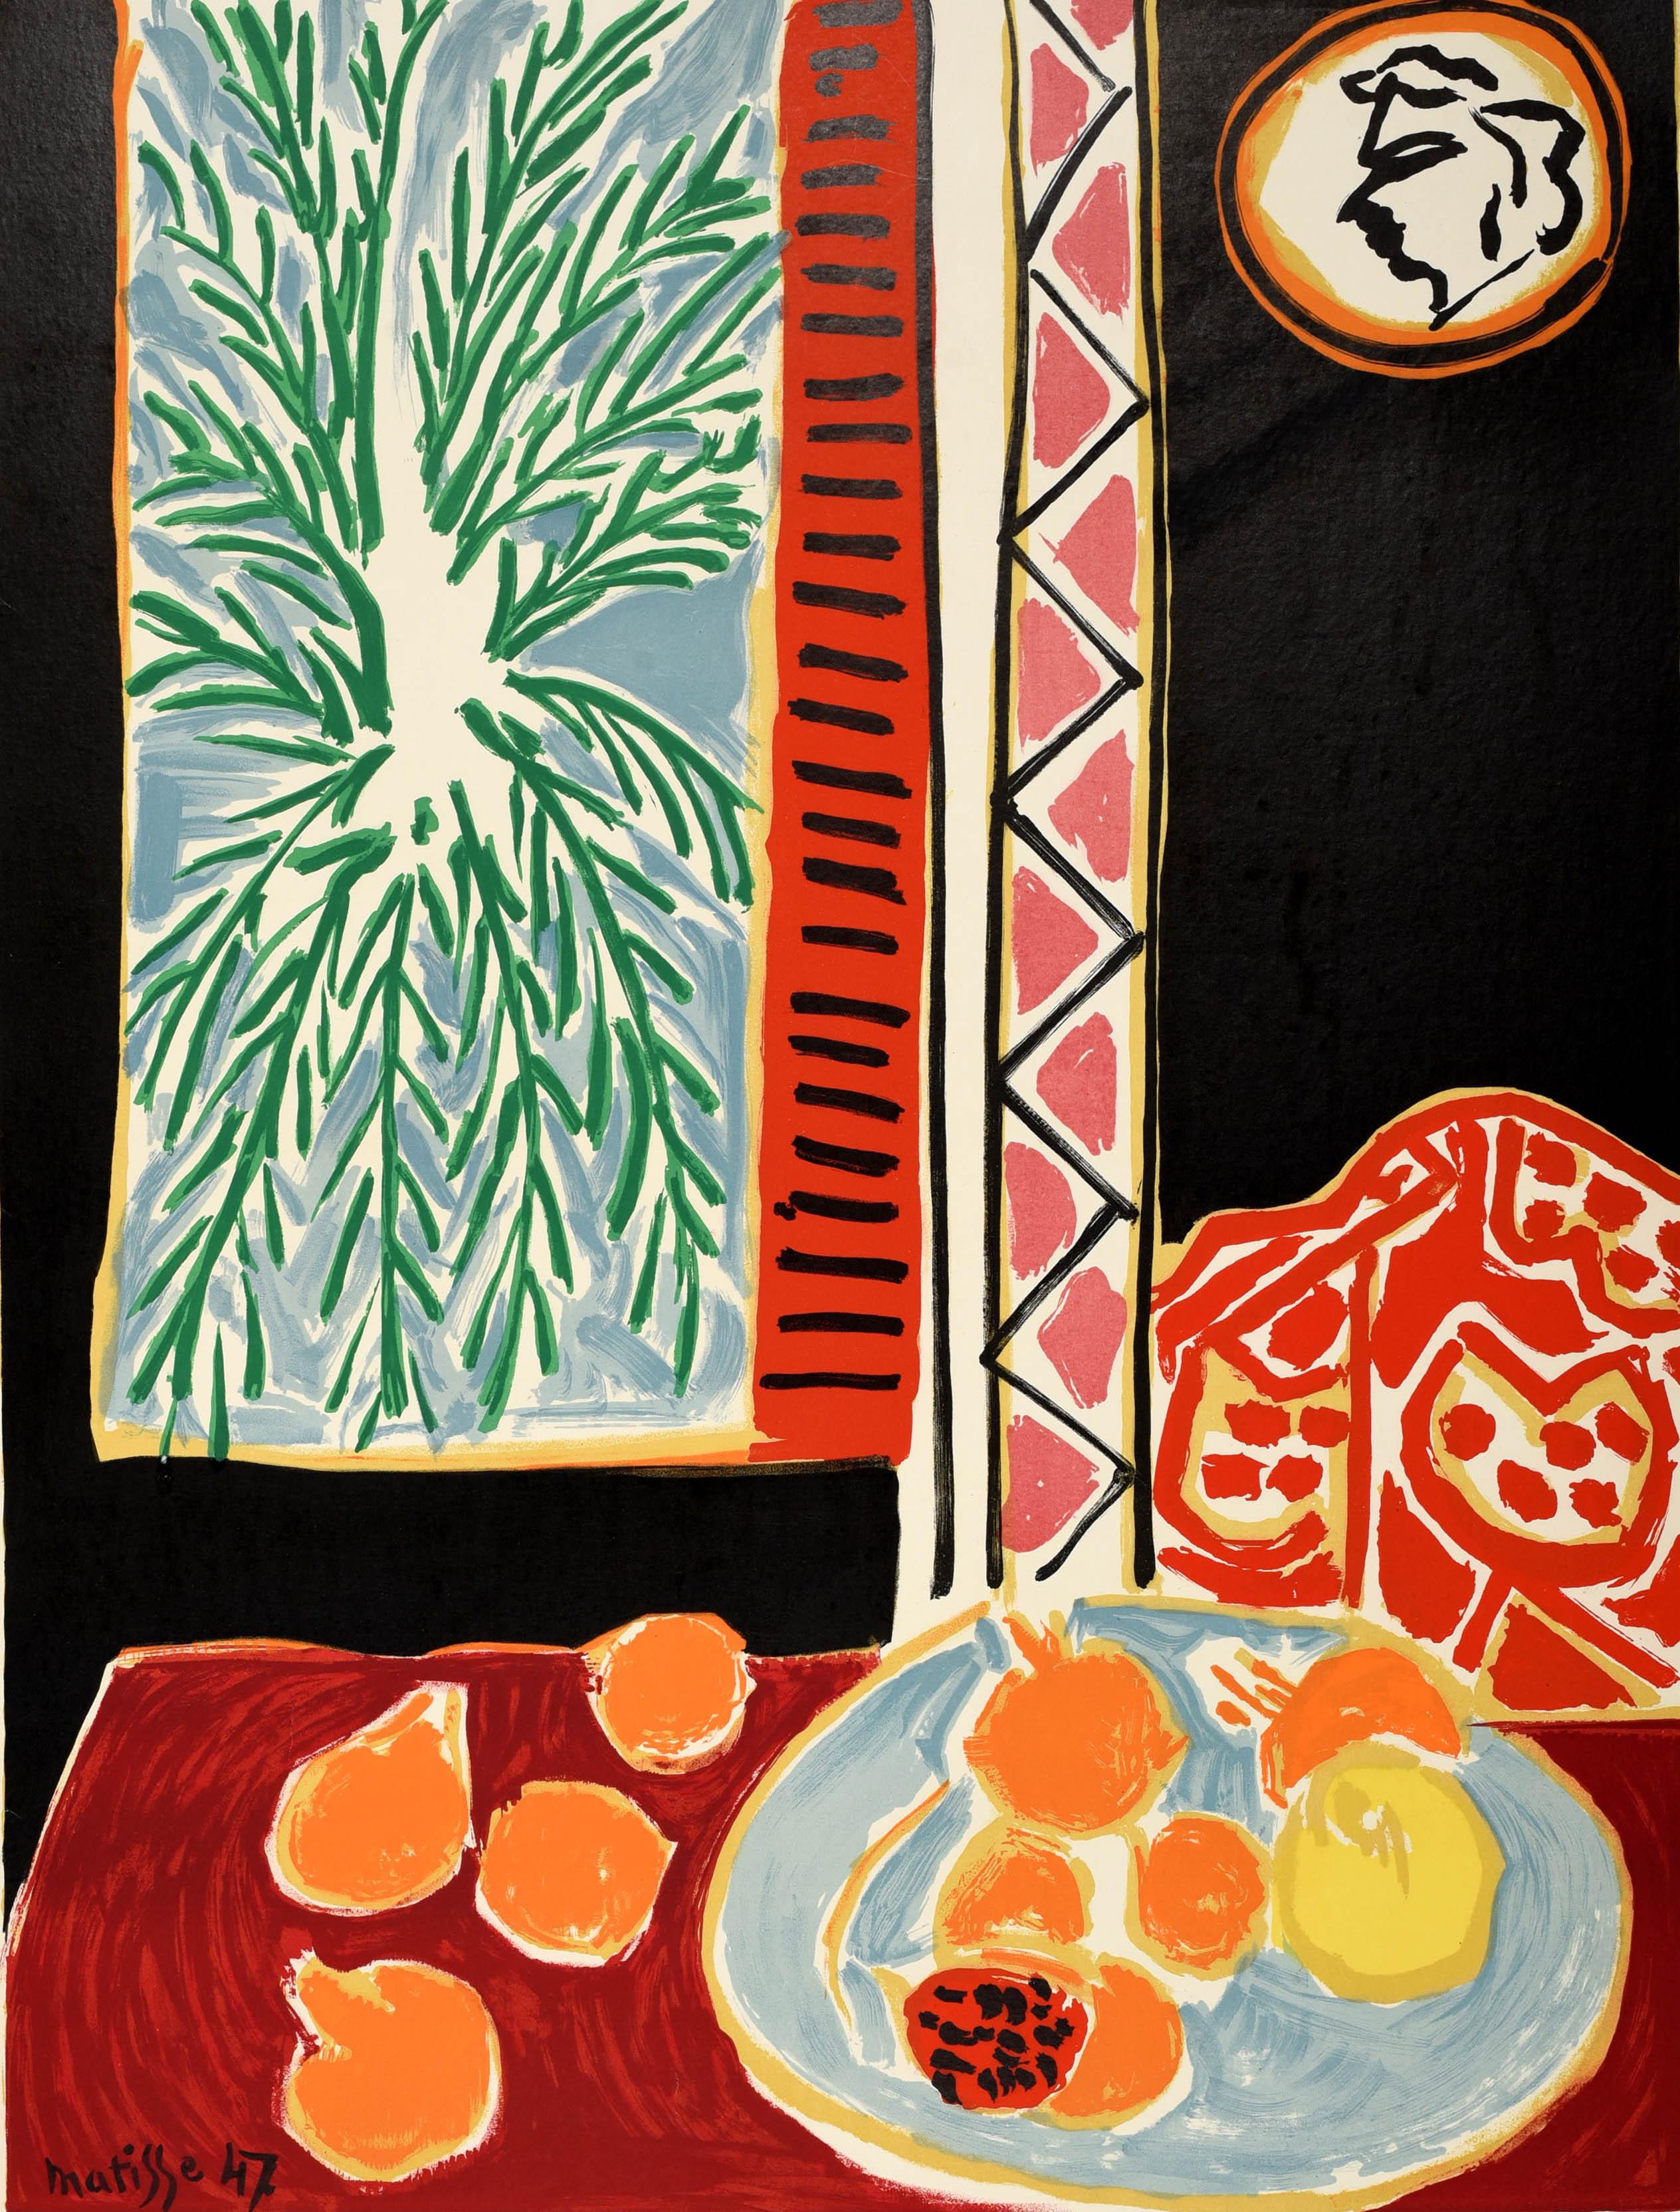 Original vintage travel advertising poster - Nice Travail et Joie / Work and Happiness H. Matisse - featuring colourful artwork by the renowned French artist Henri Matisse (1869-1954) depicting fruit on a plate and red table in front of a window